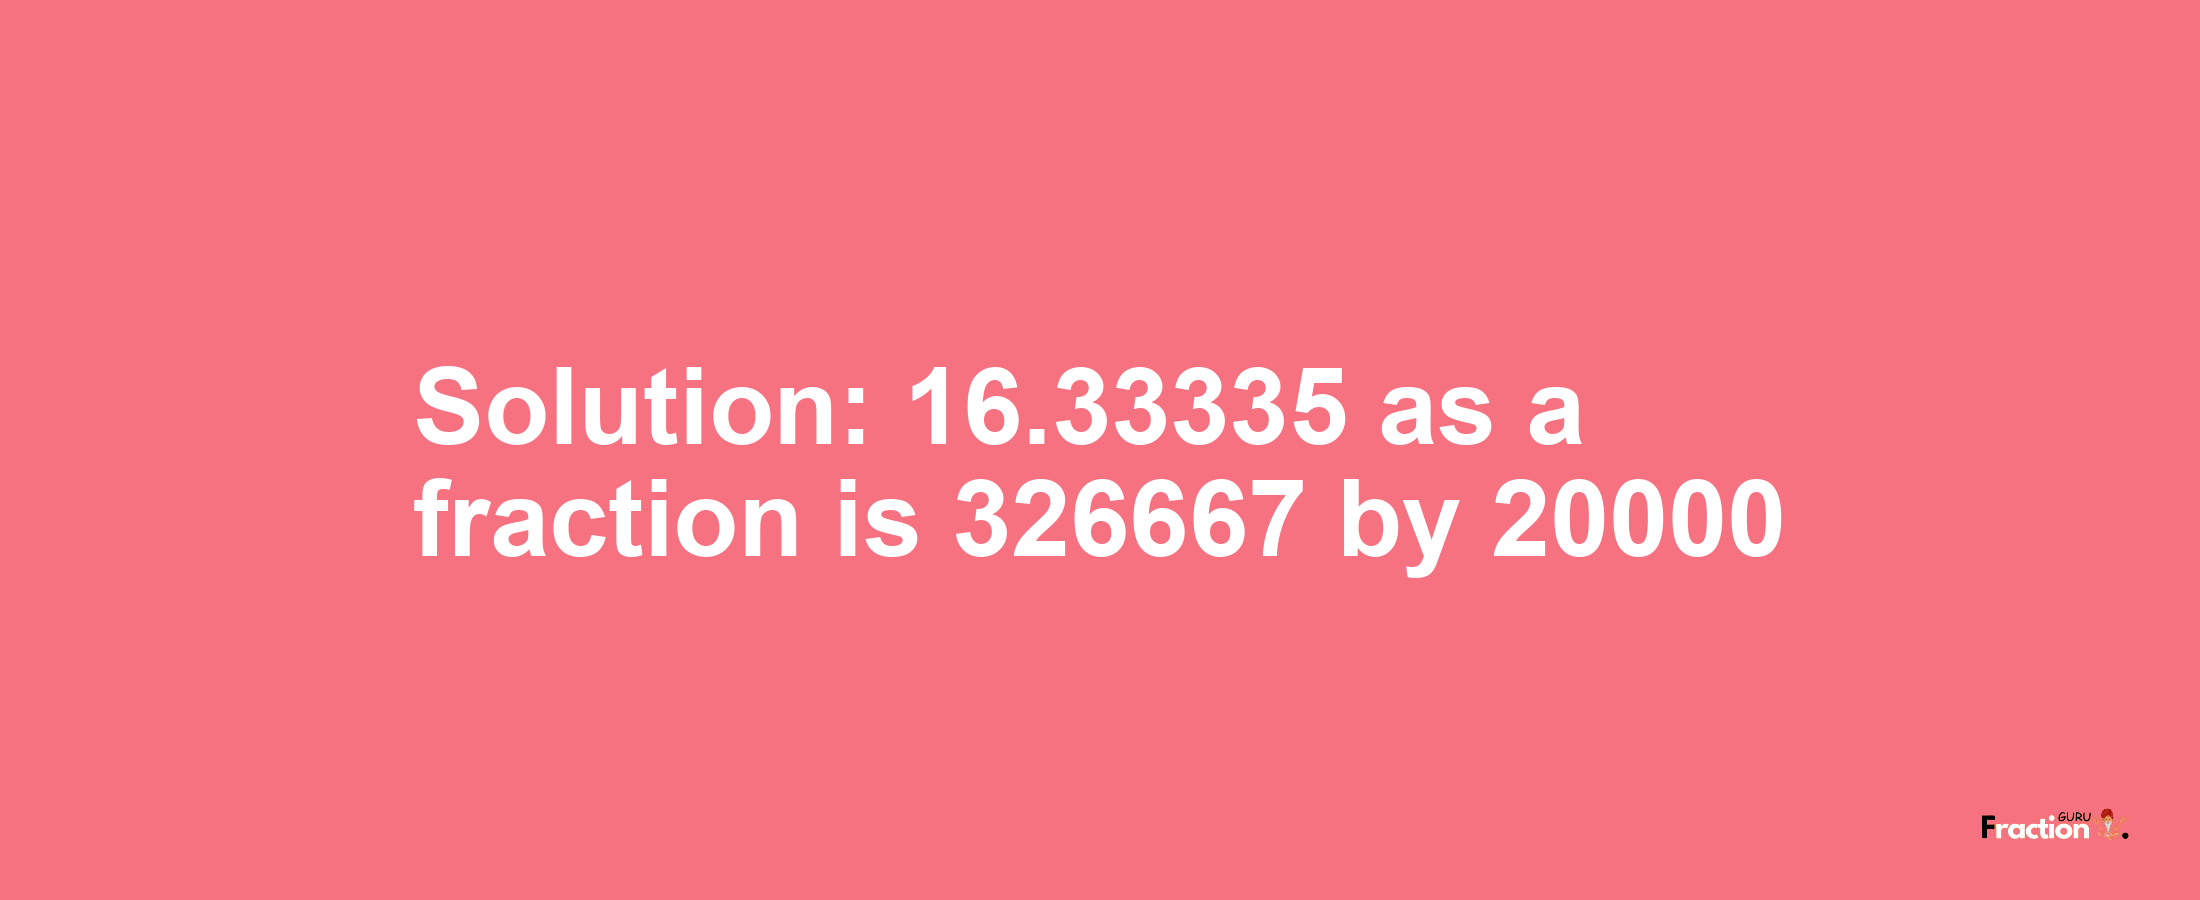 Solution:16.33335 as a fraction is 326667/20000